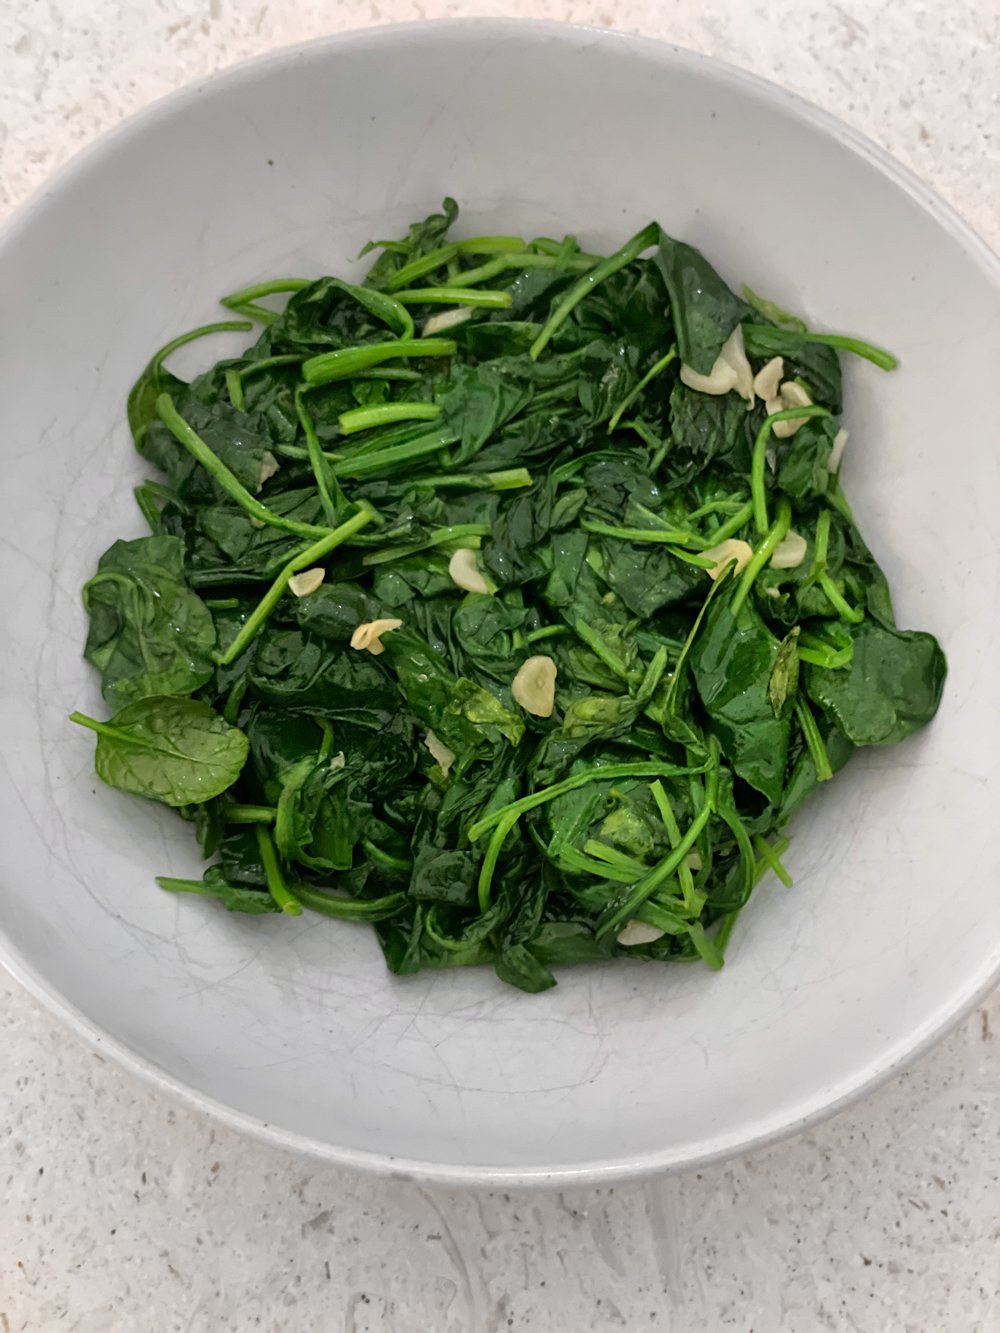 SIMPLE GARLIC AND SPINACH SIDE DISH